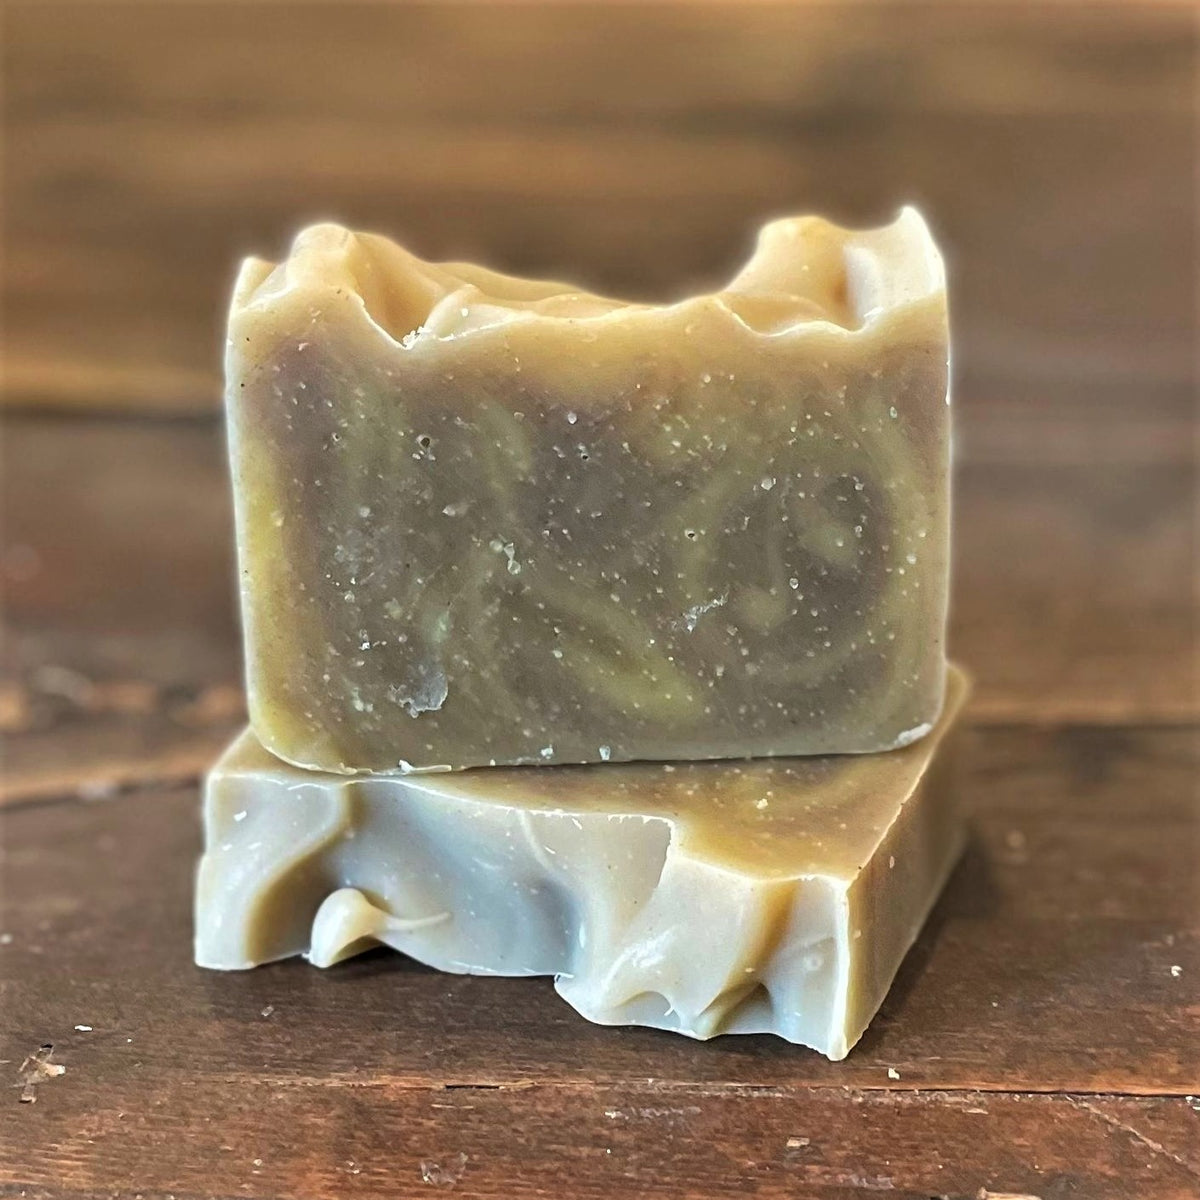 Controlling Soda Ash on Handmade Soap: Love it or Hate it (with 12